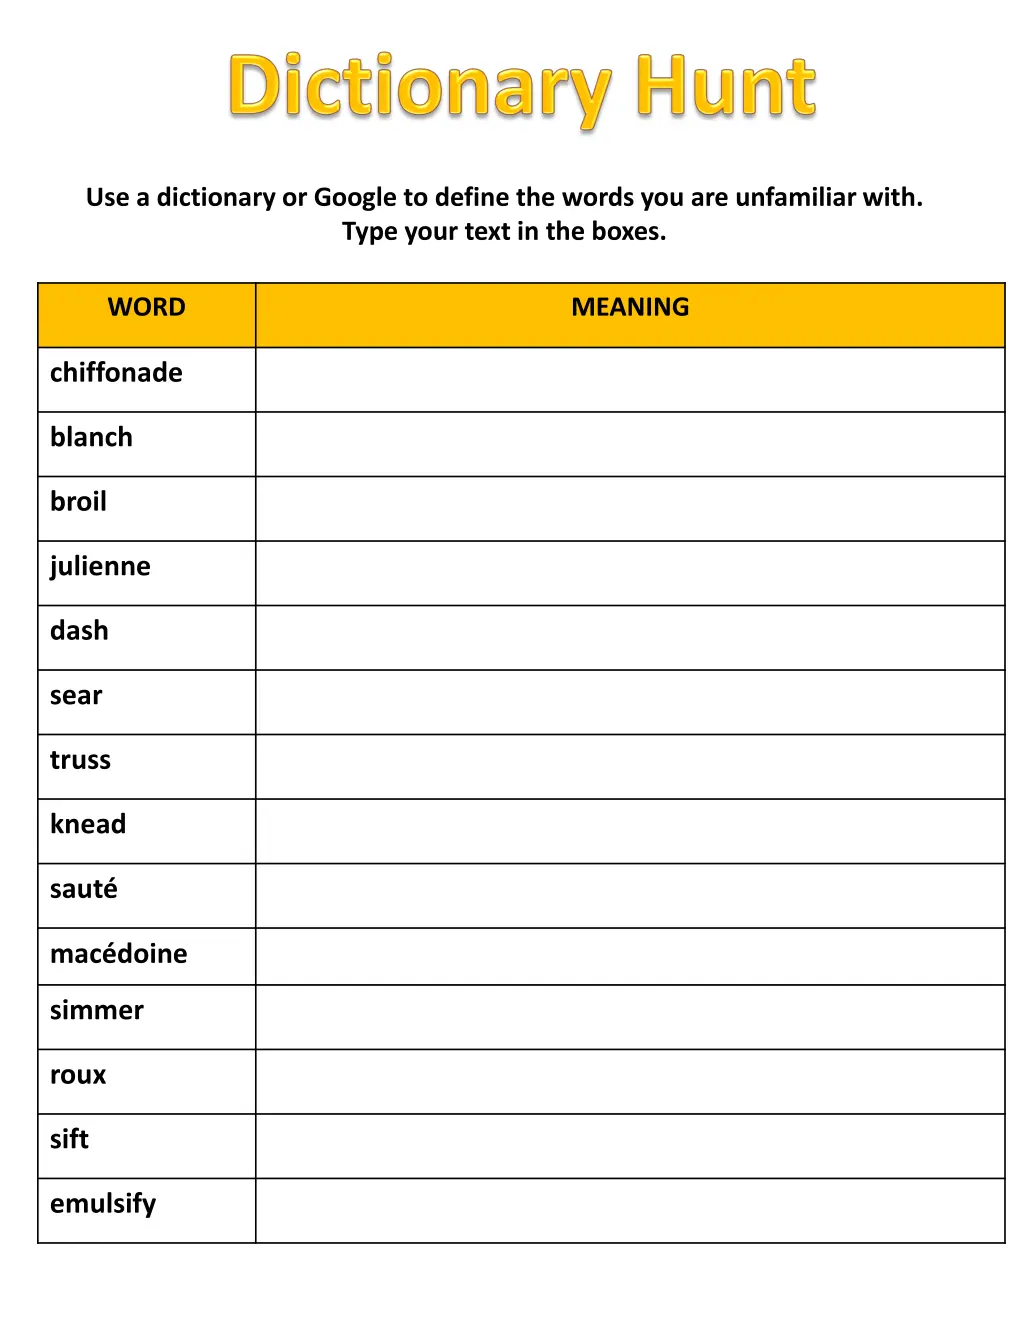 use a dictionary or google to define the words